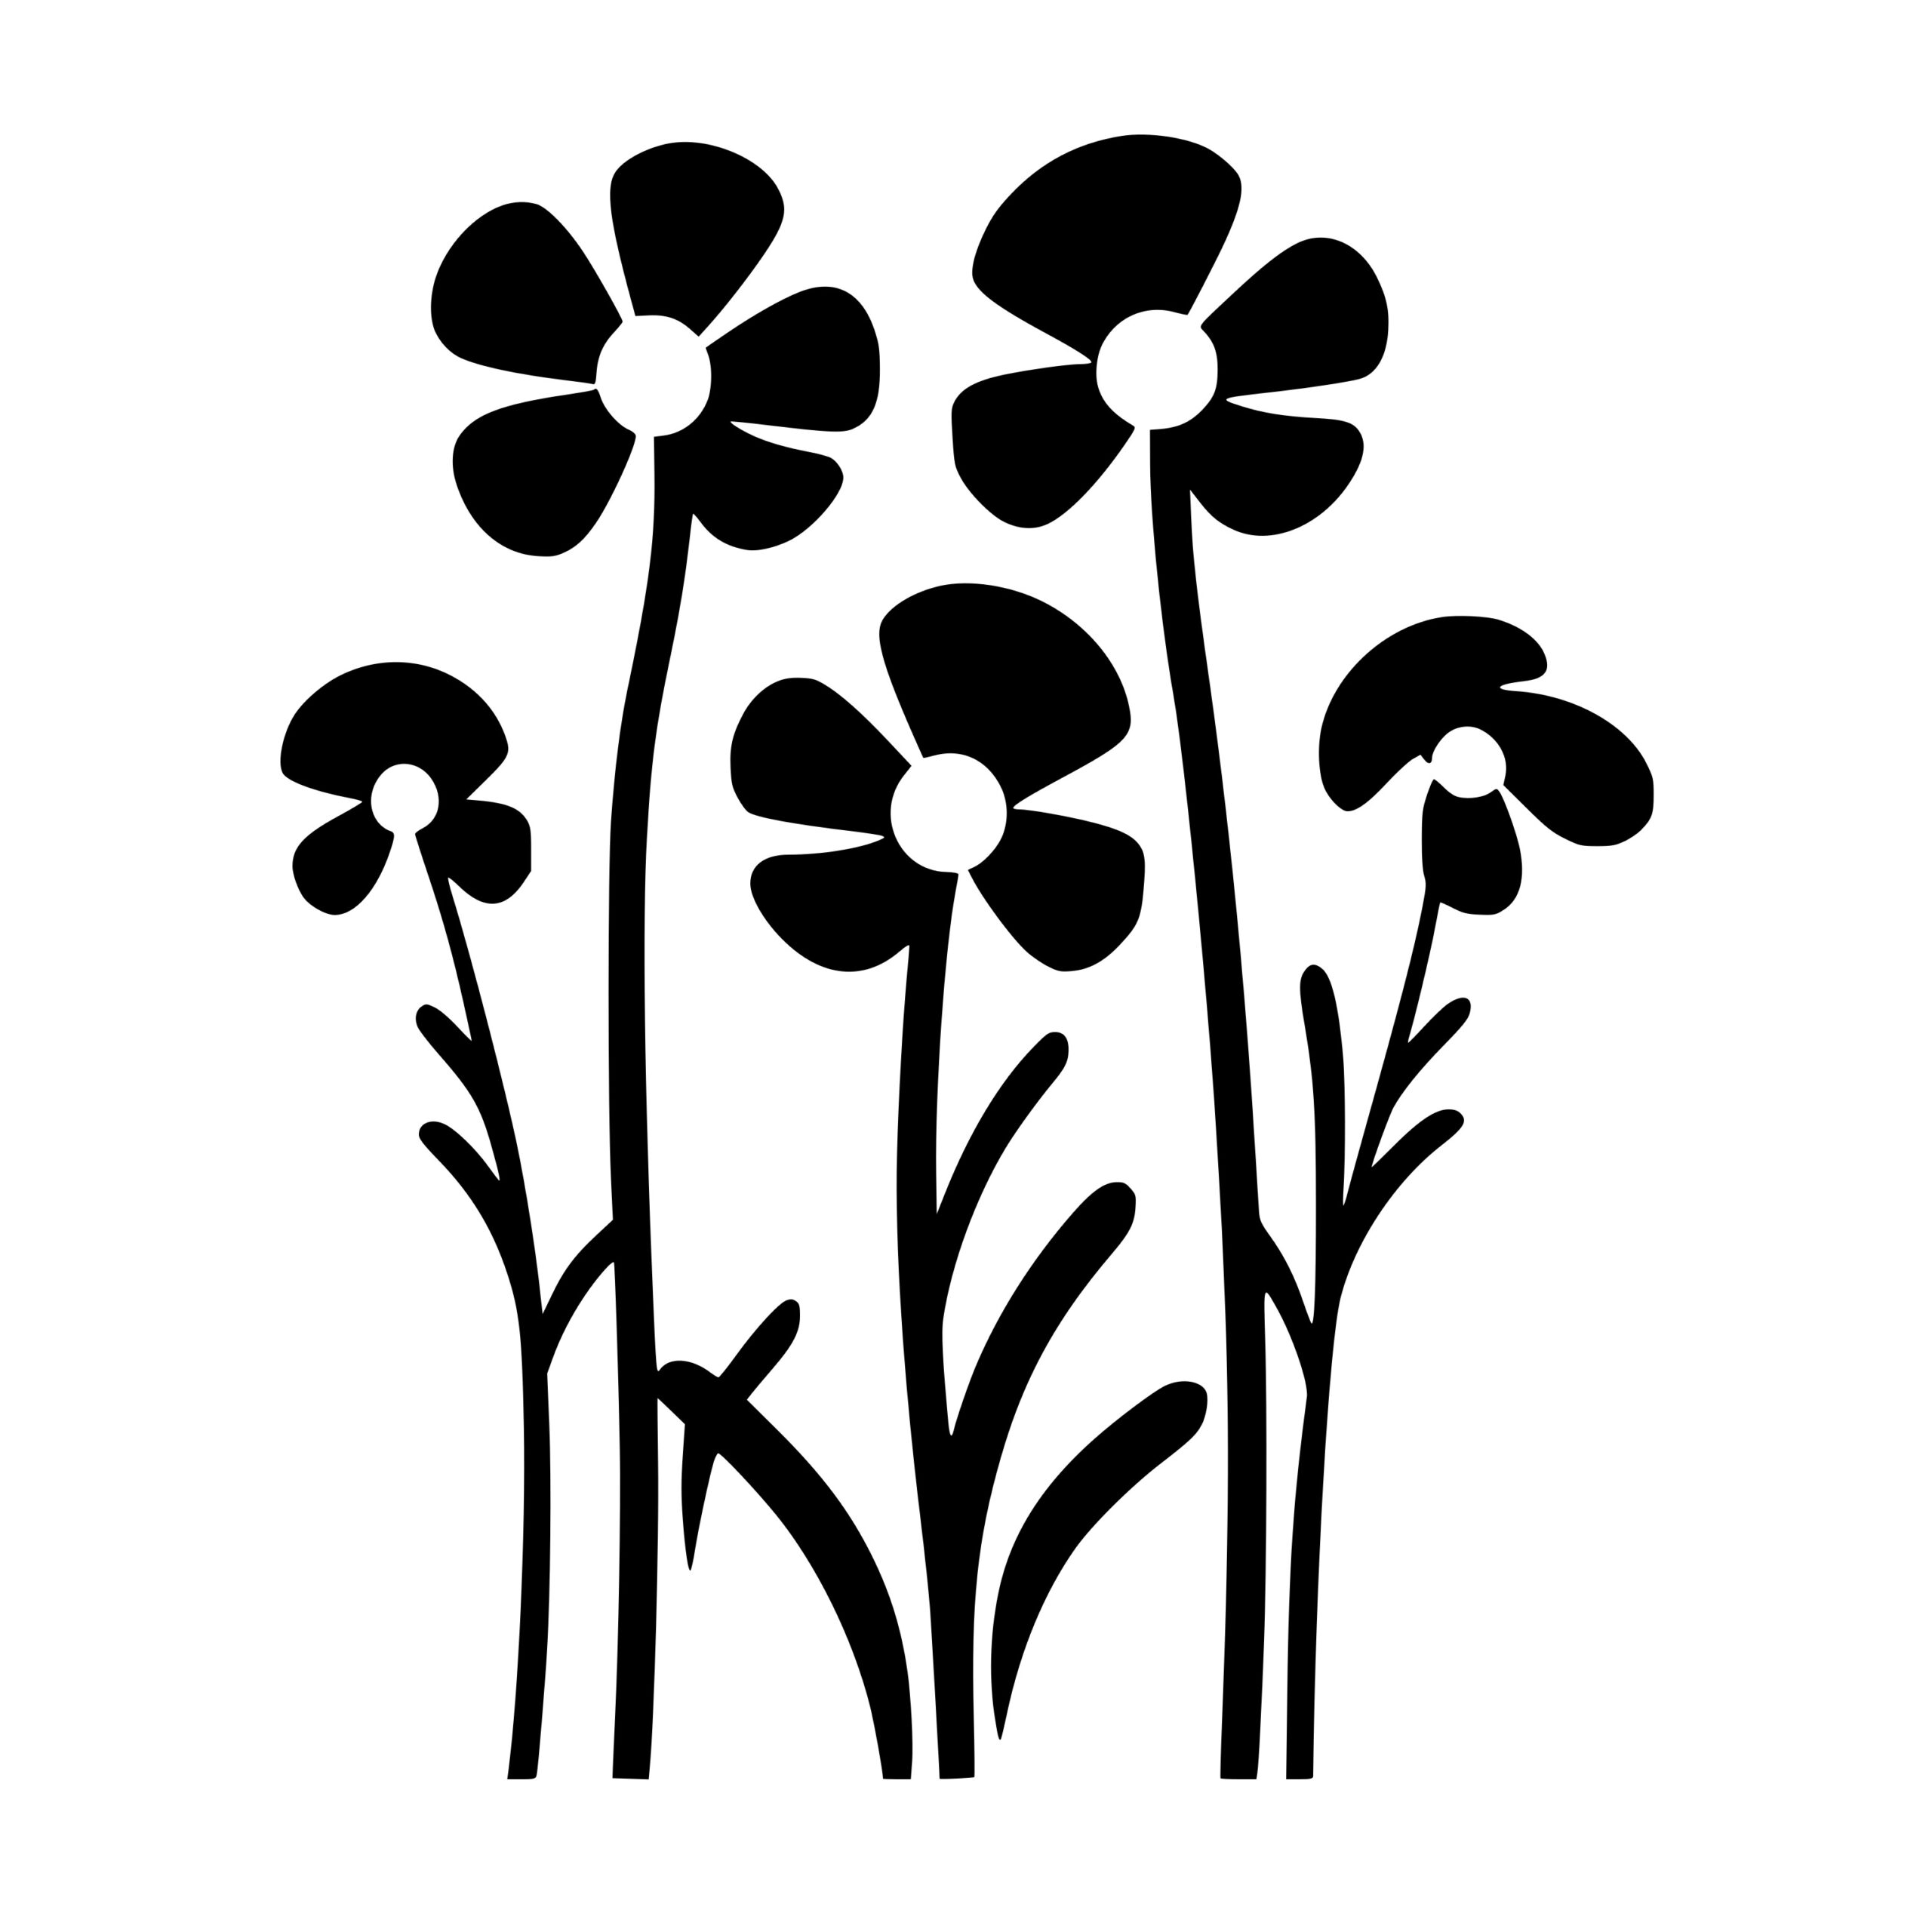 Flowers SVG Image for Cricut, Silhouette, Laser Machines Instant Download